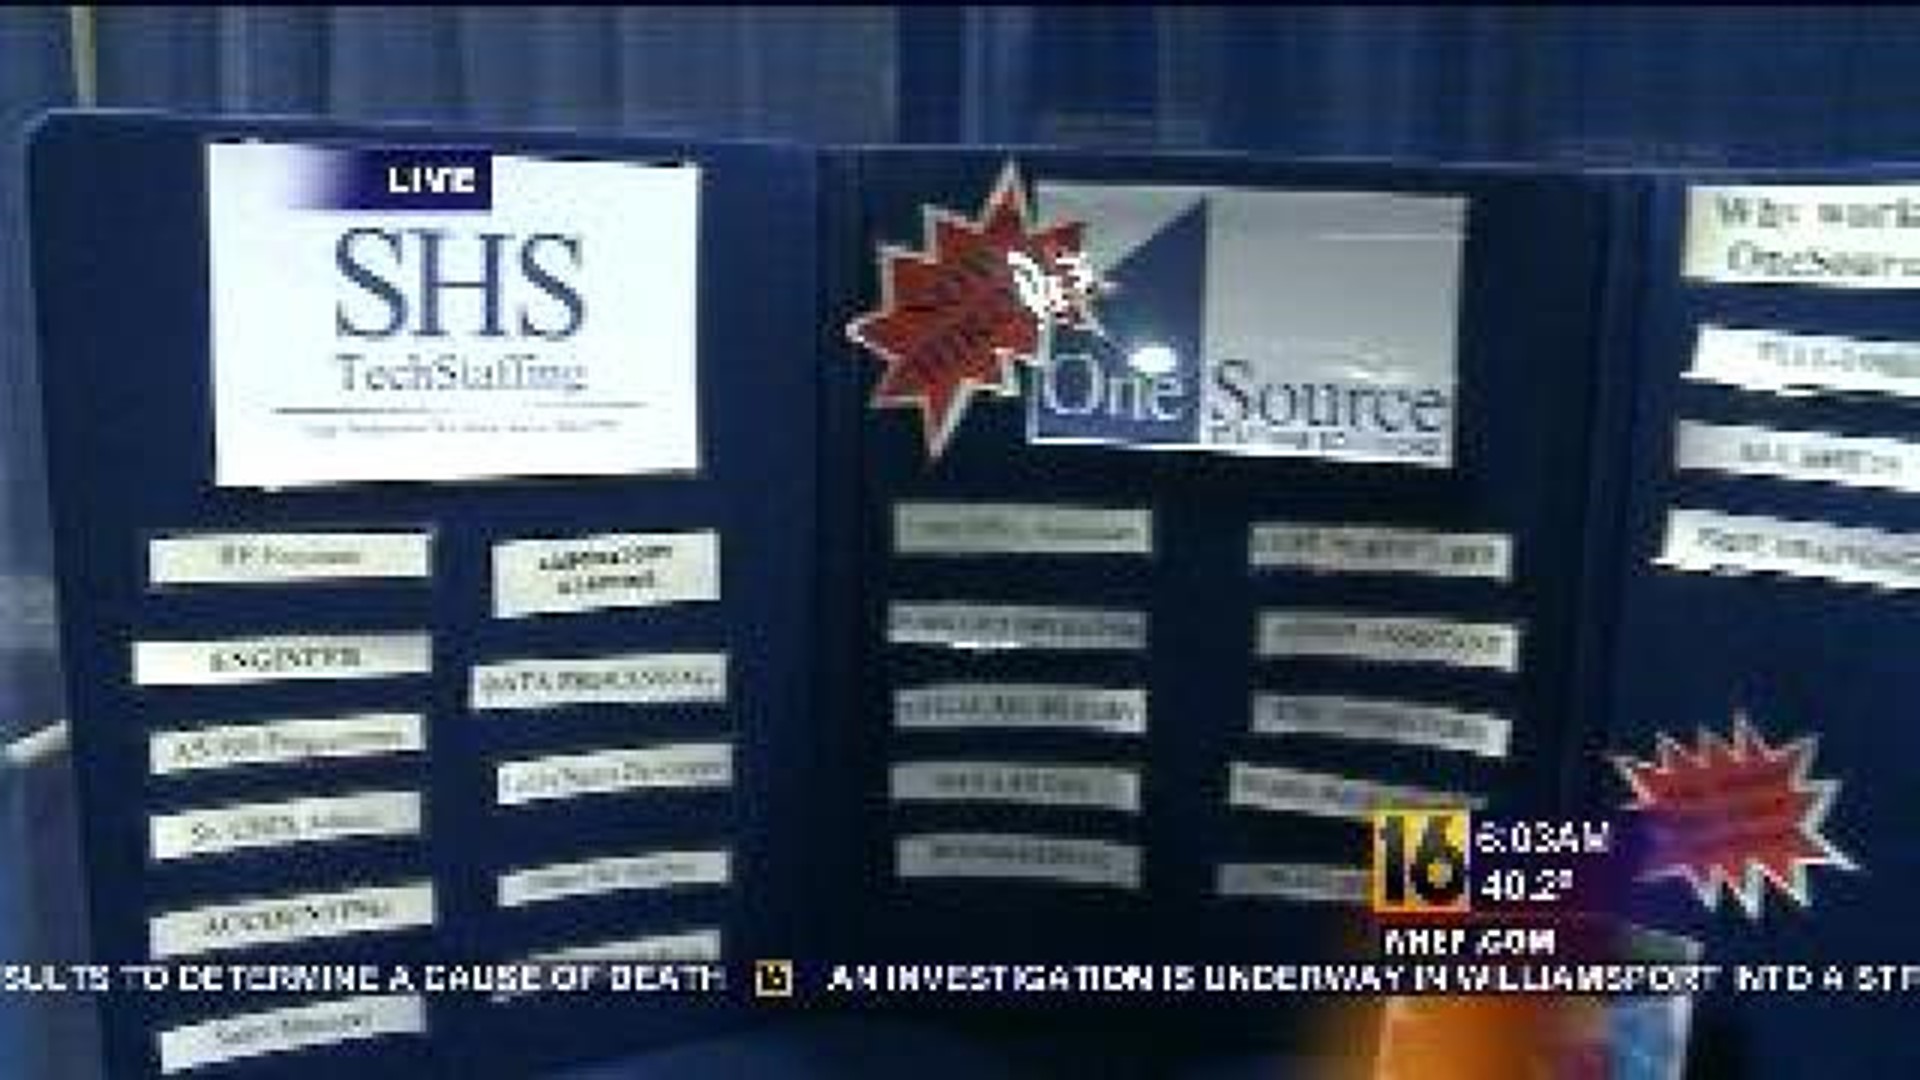 Employment Expo: One Source Staffing